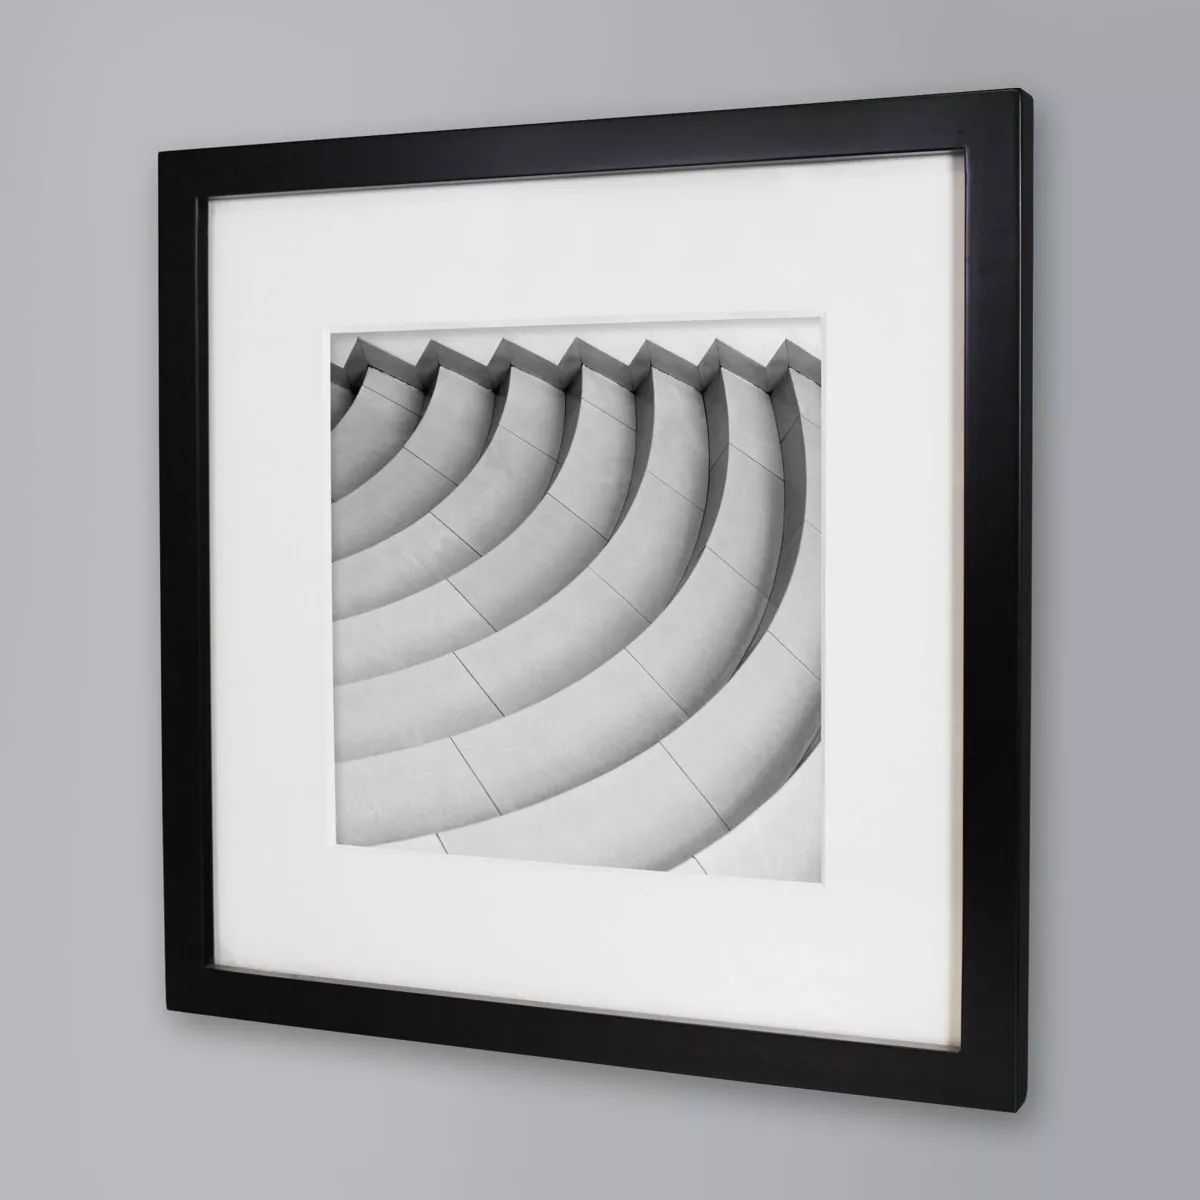 12" x 12" Matted to 8" x 8" Thin Gallery Frame - Threshold™ | Target